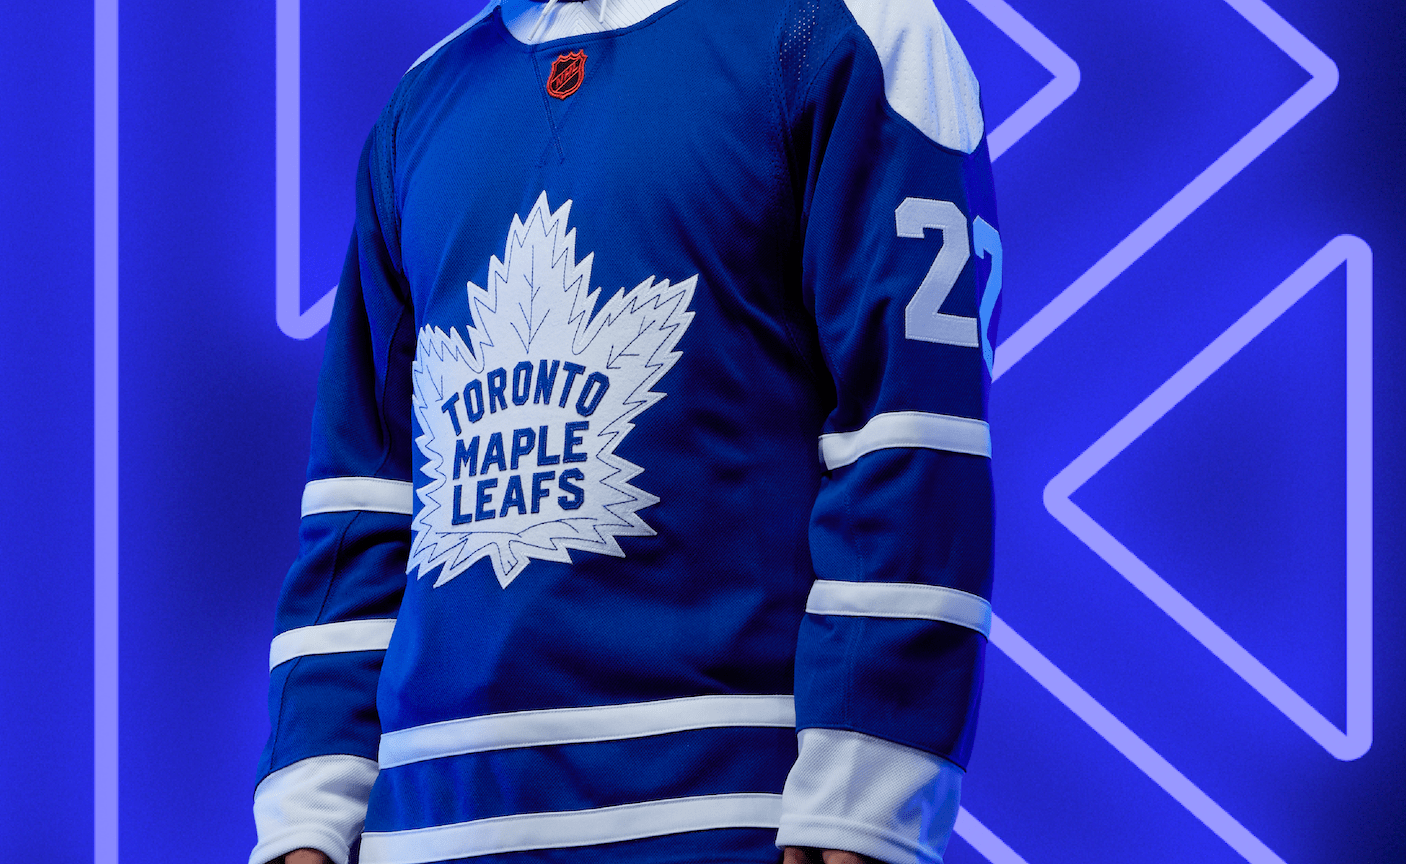 We’ve had some really fun projects with Toronto recently, including the Drew House/Justin Bieber collaboration on their third uniform. This is yet another, honoring their 1962 Stanley Cup-winning uniform.